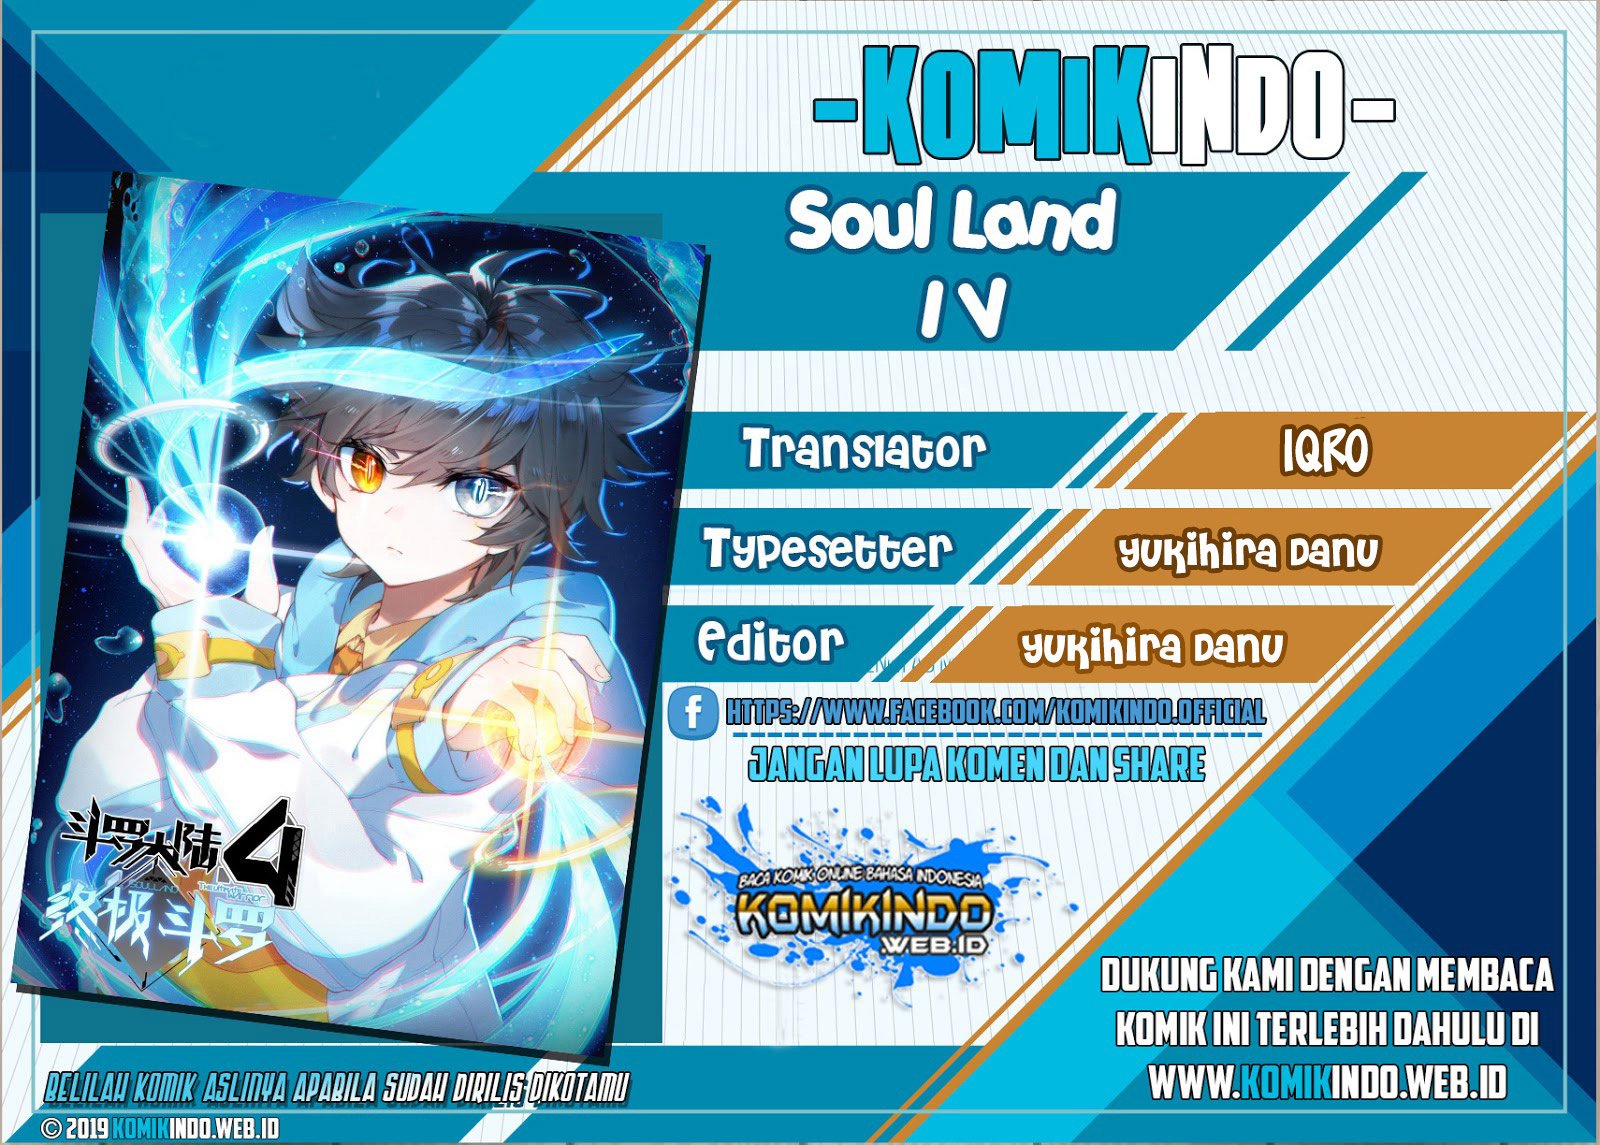 Soul Land IV – The Ultimate Combat Chapter 35